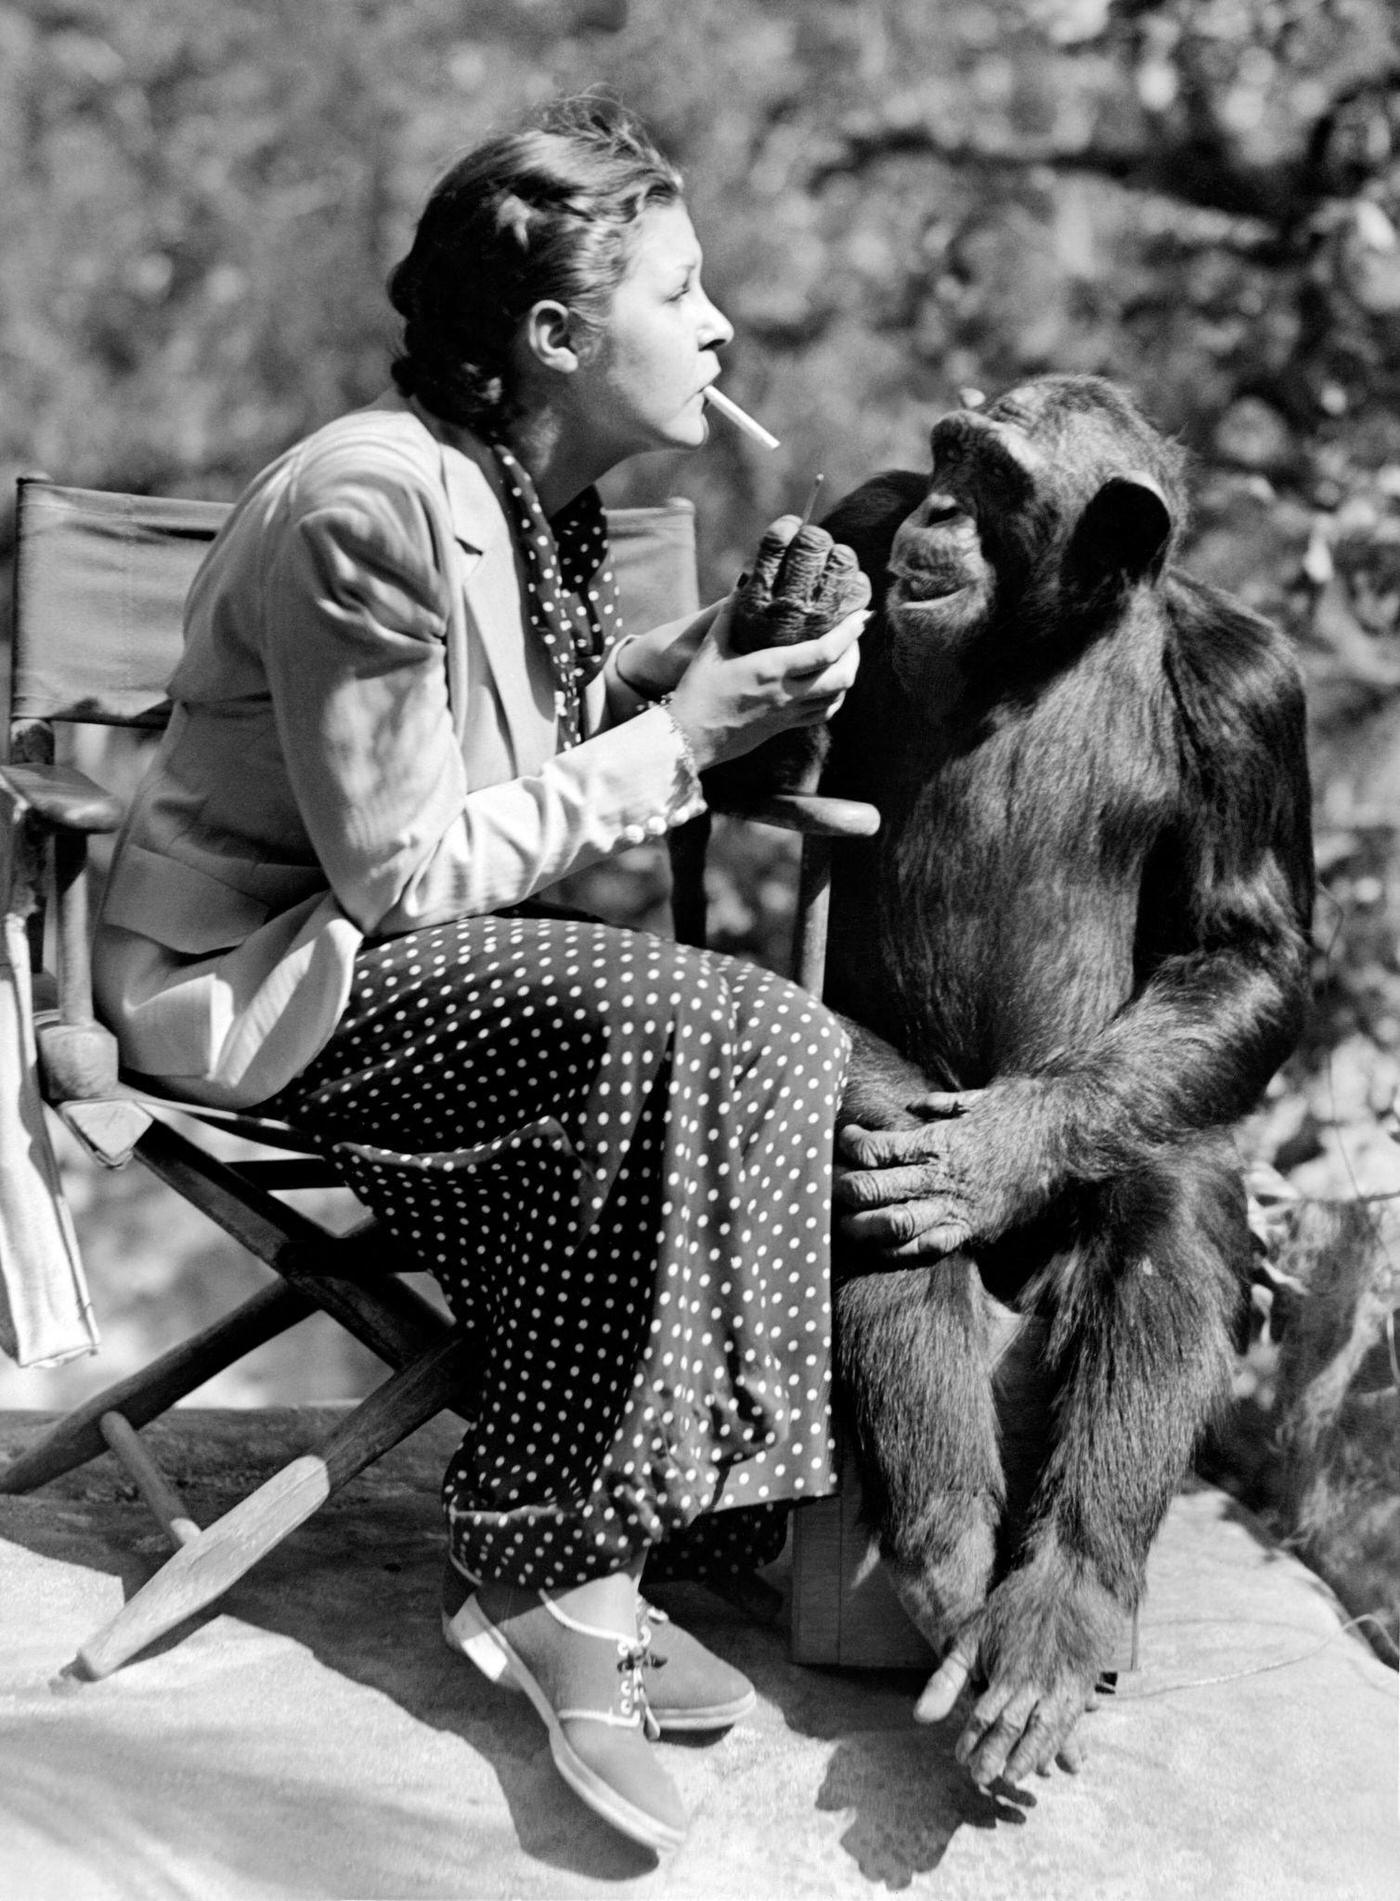 American comic actress Martha Raye pictured with a Chimpanzee on the filming of "The Big Broadcast of 1937", 1936